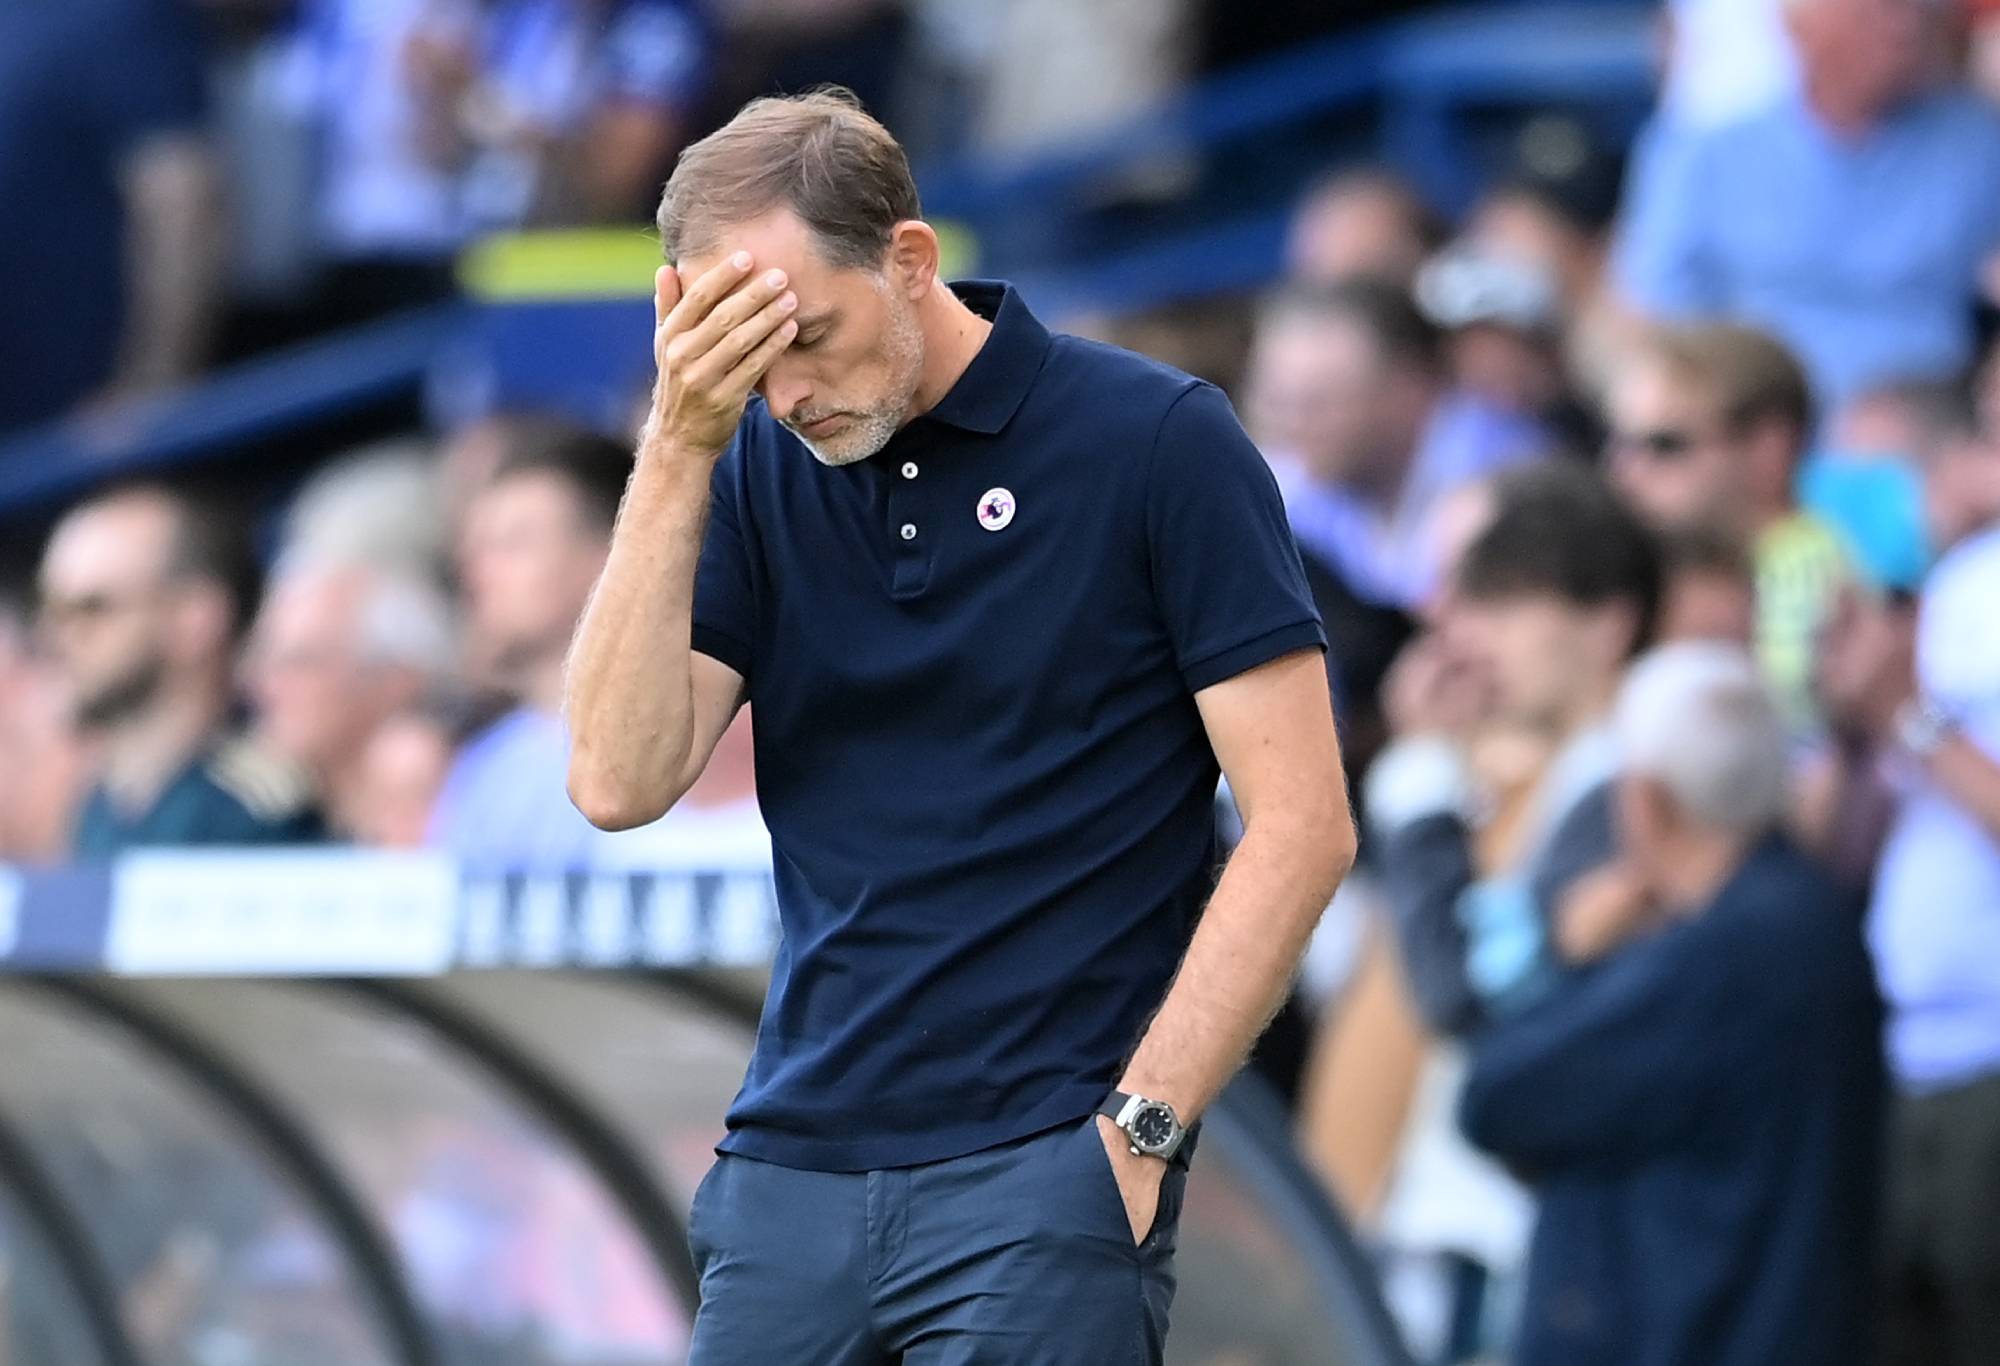 Thomas Tuchel, Manager of Chelsea reacts after Rodrigo Moreno of Leeds United scores their team's second goal during the Premier League match between Leeds United and Chelsea FC at Elland Road on August 21, 2022 in Leeds, England. (Photo by Michael Regan/Getty Images)